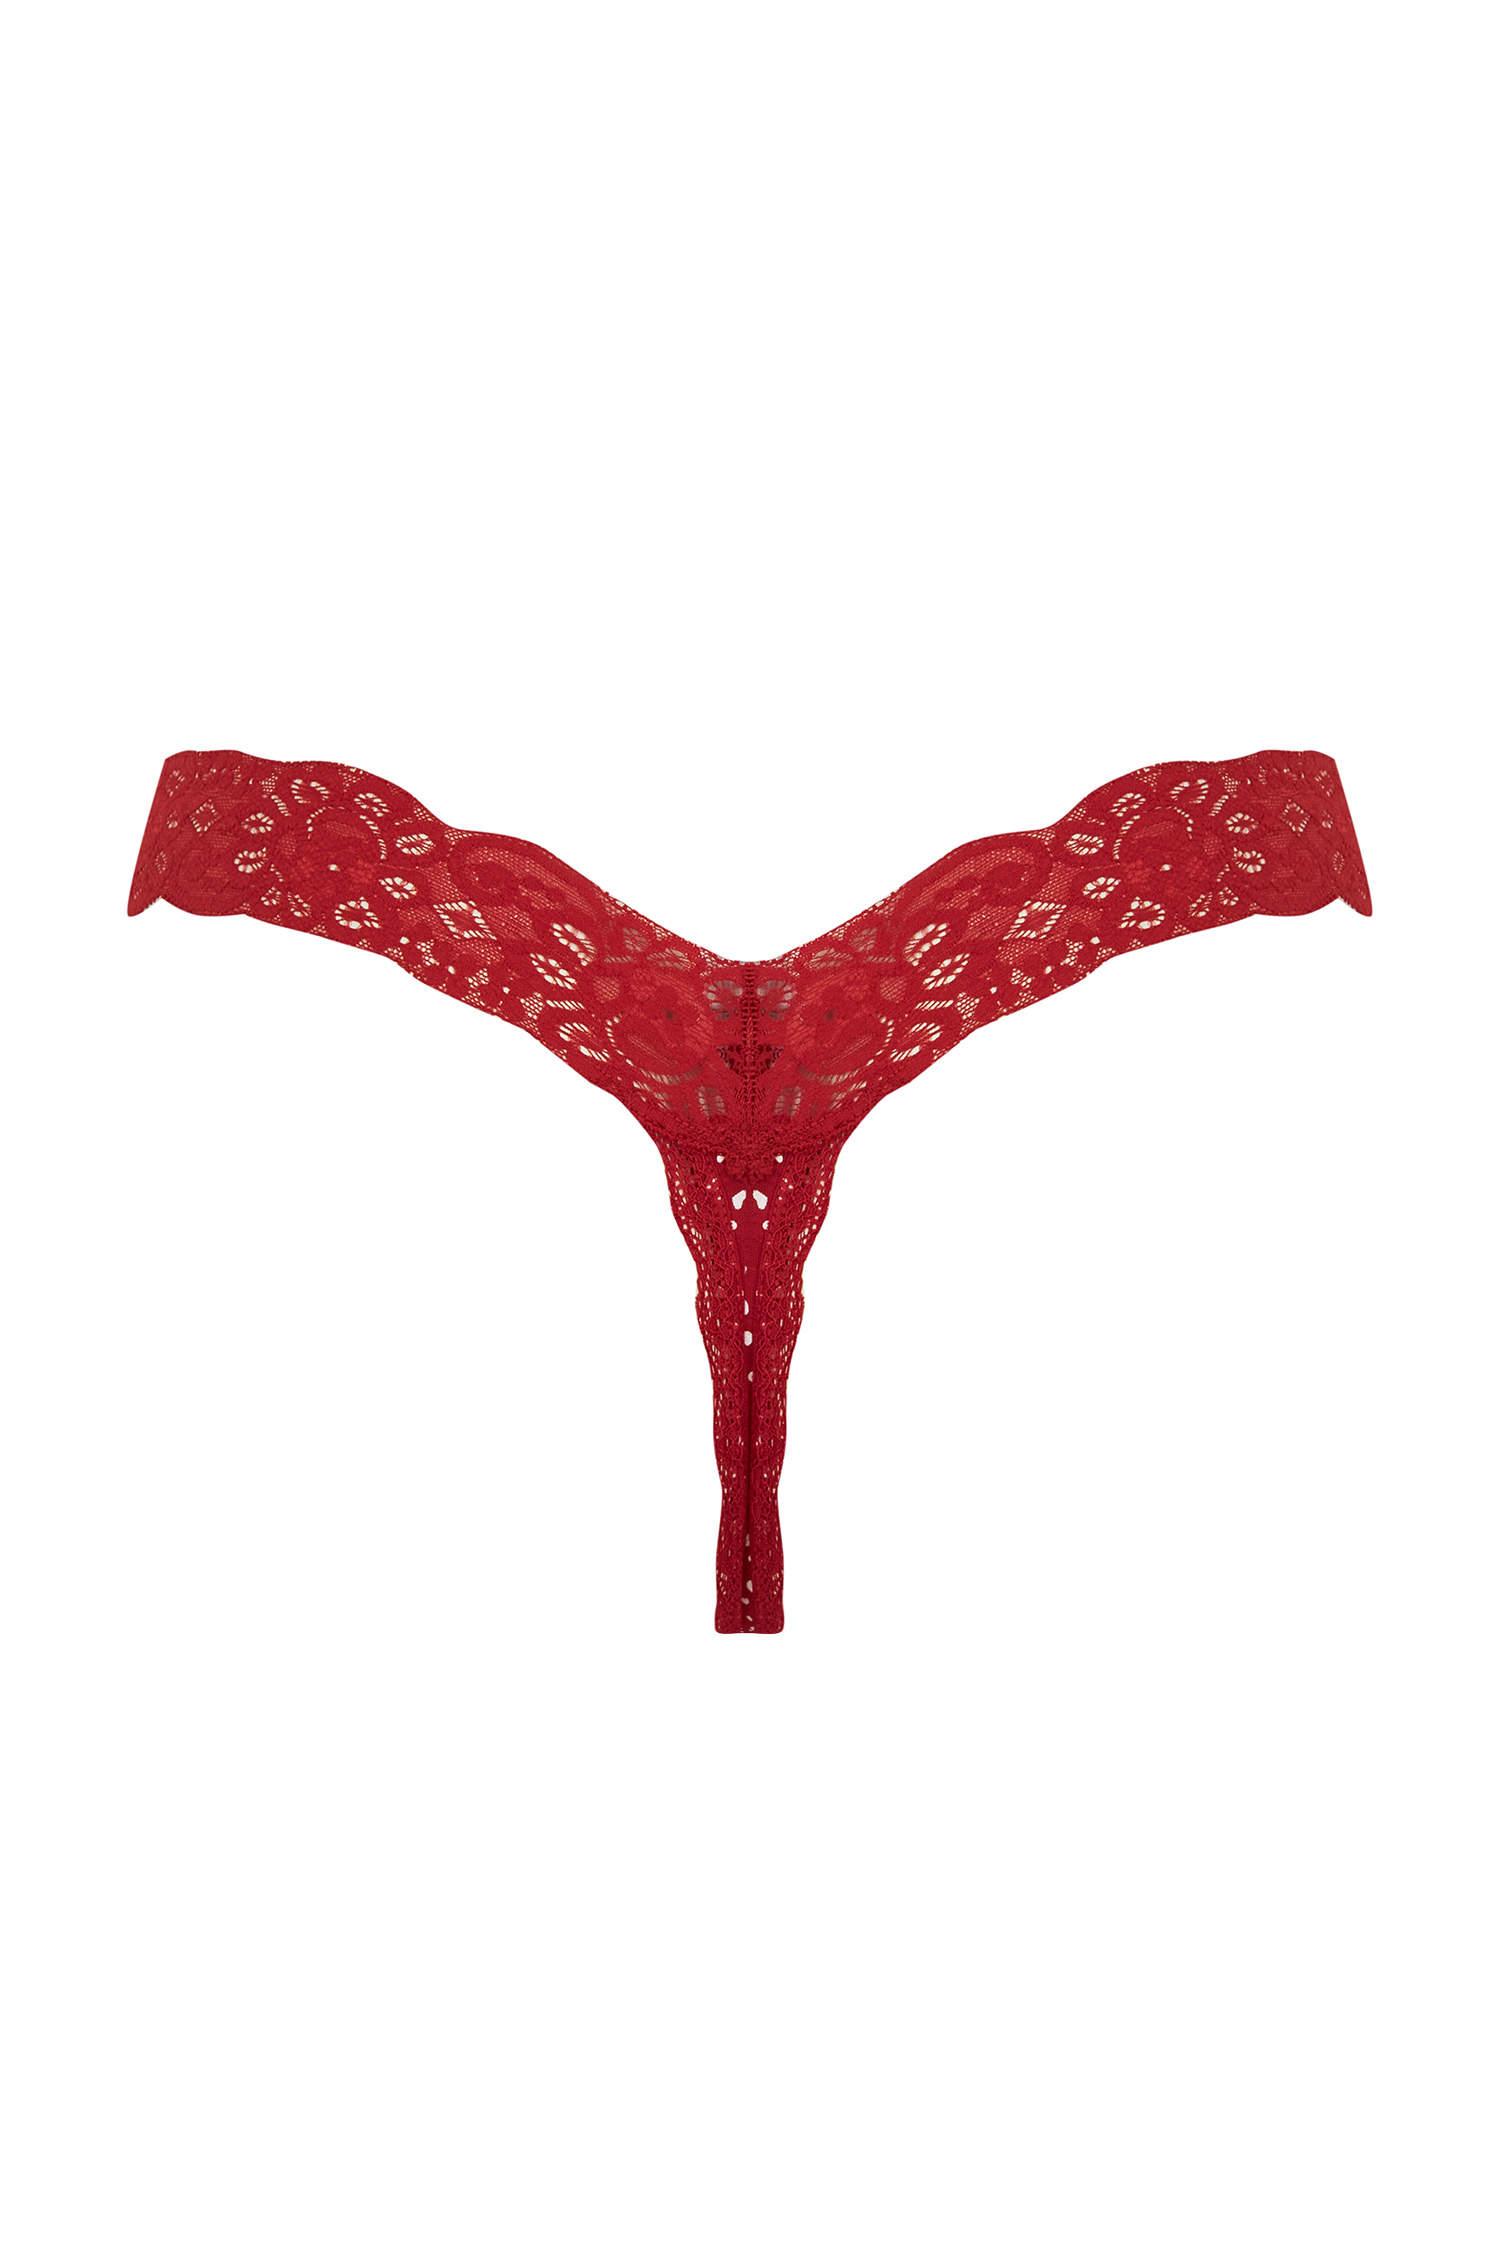 Red WOMAN Fall In Love Valentine's Day Slogan Heart Patterned String Panties  2746907